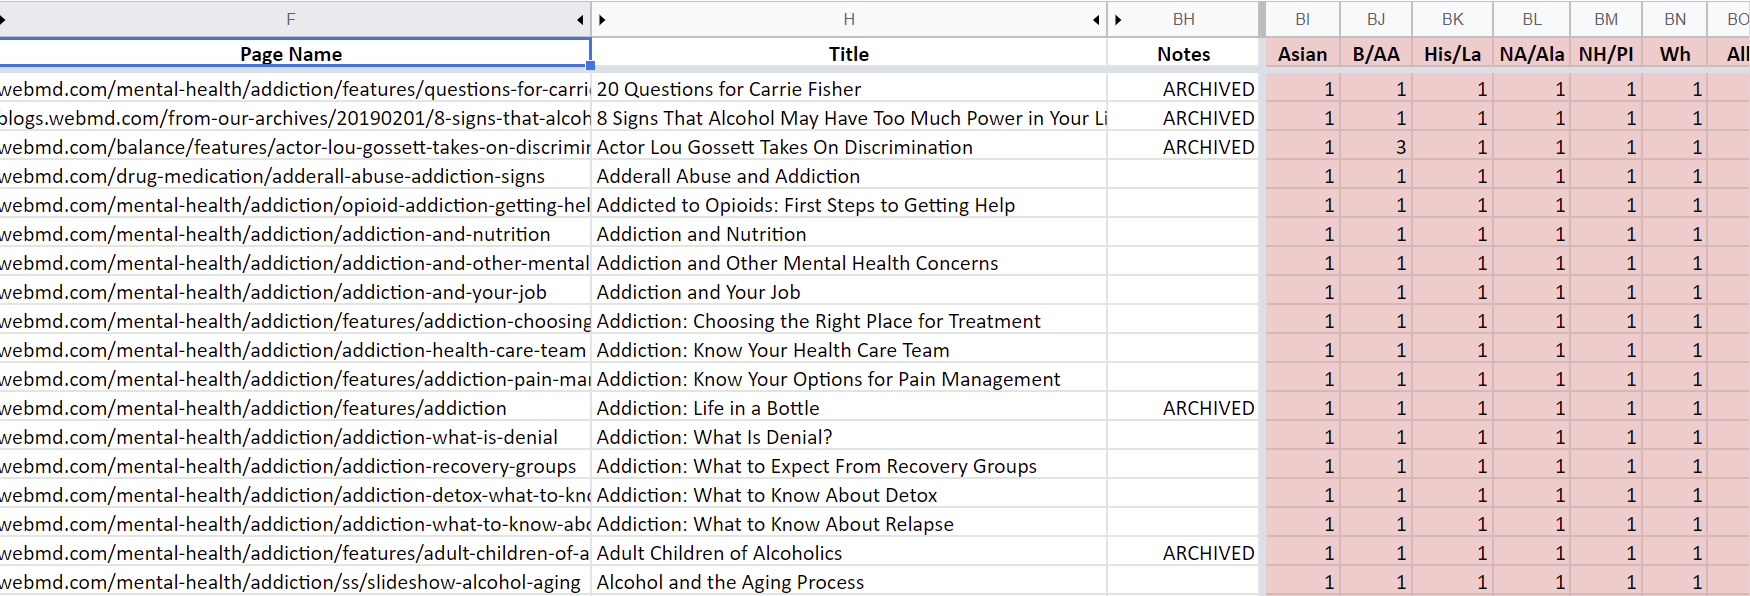 Addiction and Substance Abuse Spreadsheet